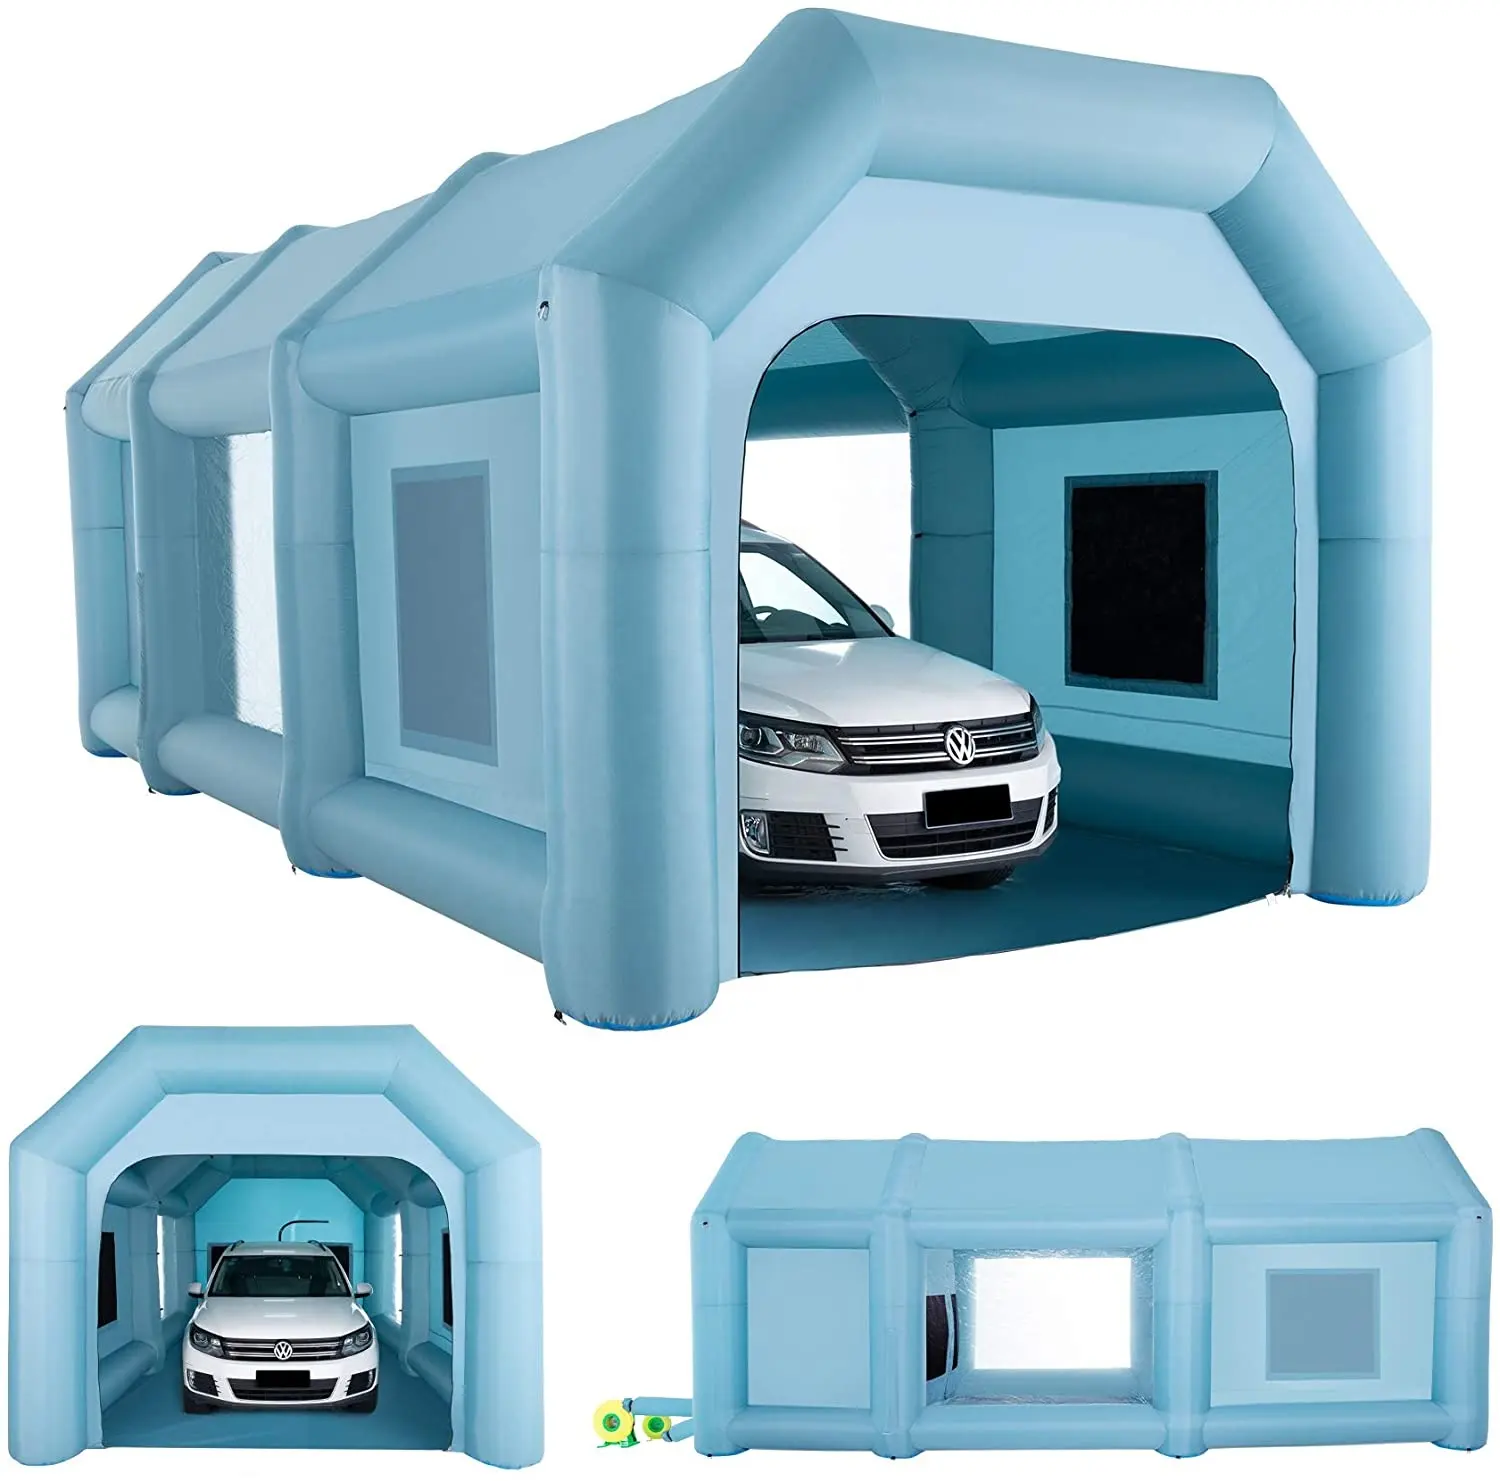 13x8x7 ft Foammaker Inflatable Paint Booth with 2 Blowers Inflatable Spray Booth with Filter System Portable Car Paint Booth for Car Parking Tent Workstation